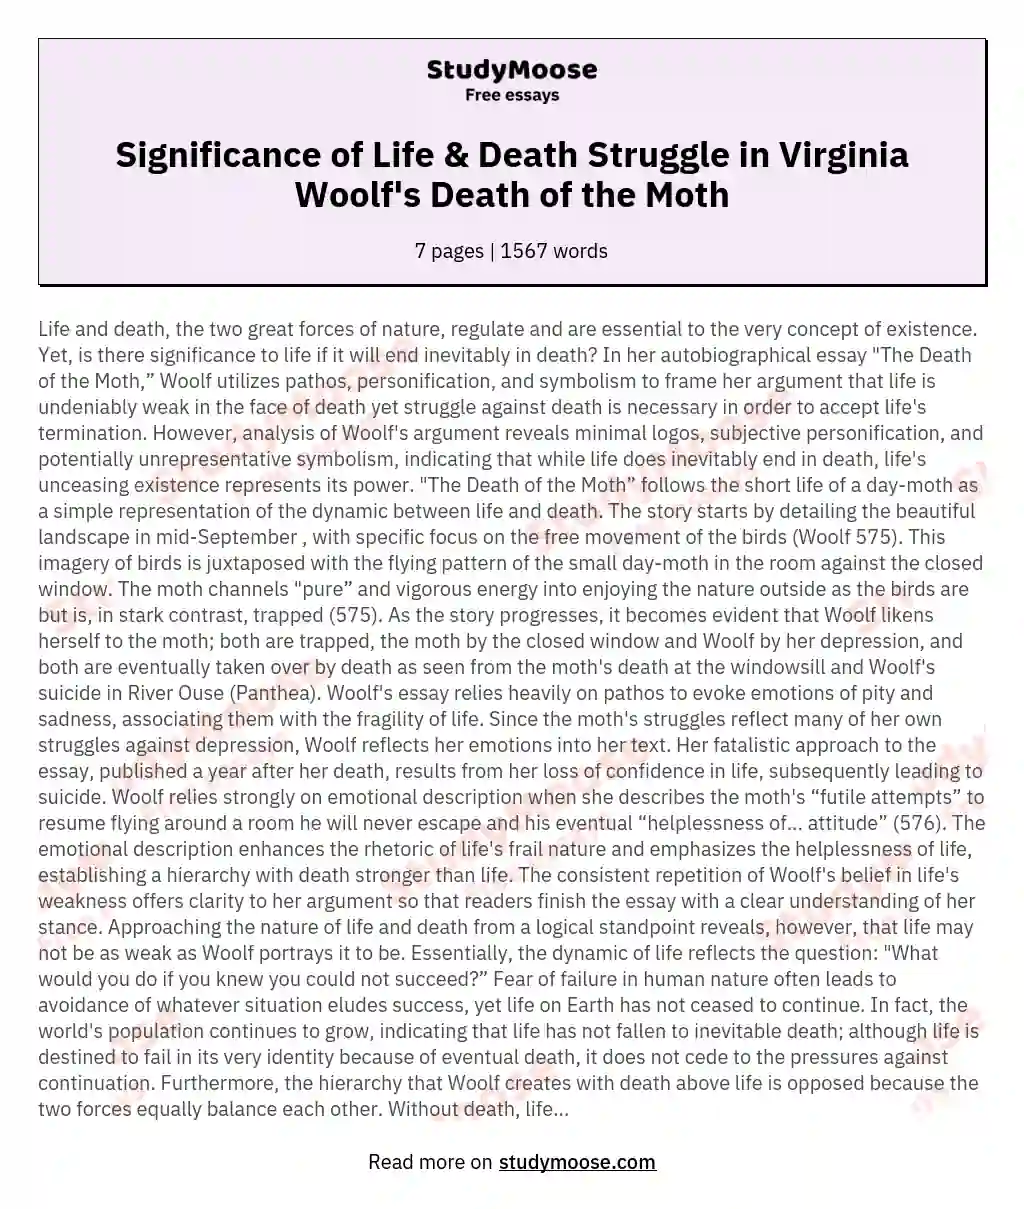 The Significance of Life and the Struggle Against Death in The Death of the Moth, an Essay by Virginia Woolf